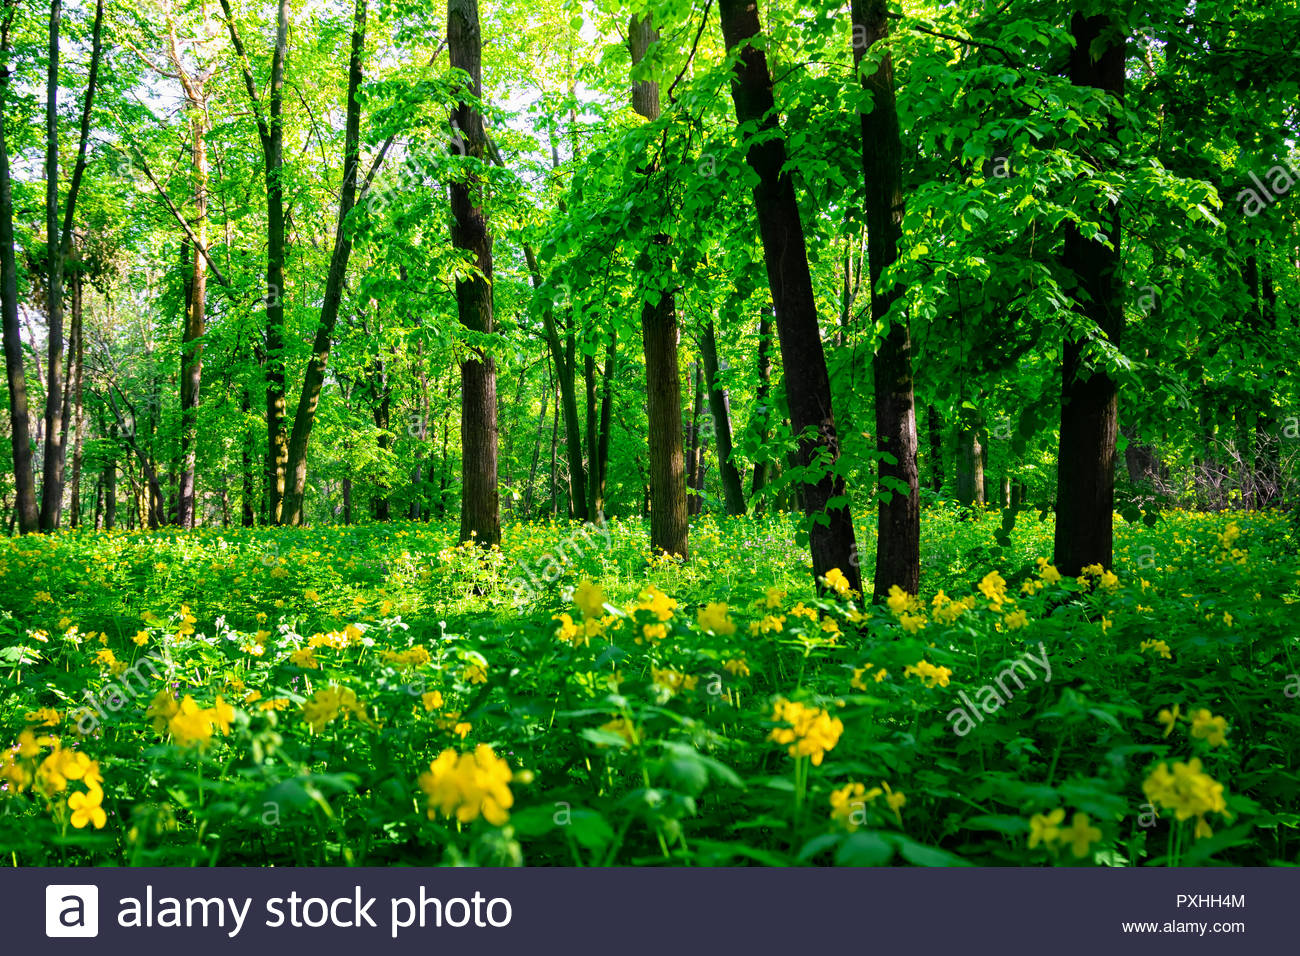 Beautiful Green Forest Landscape In Summer Nature Scenery With Yellow Wild Flowers Stock Photo Alamy